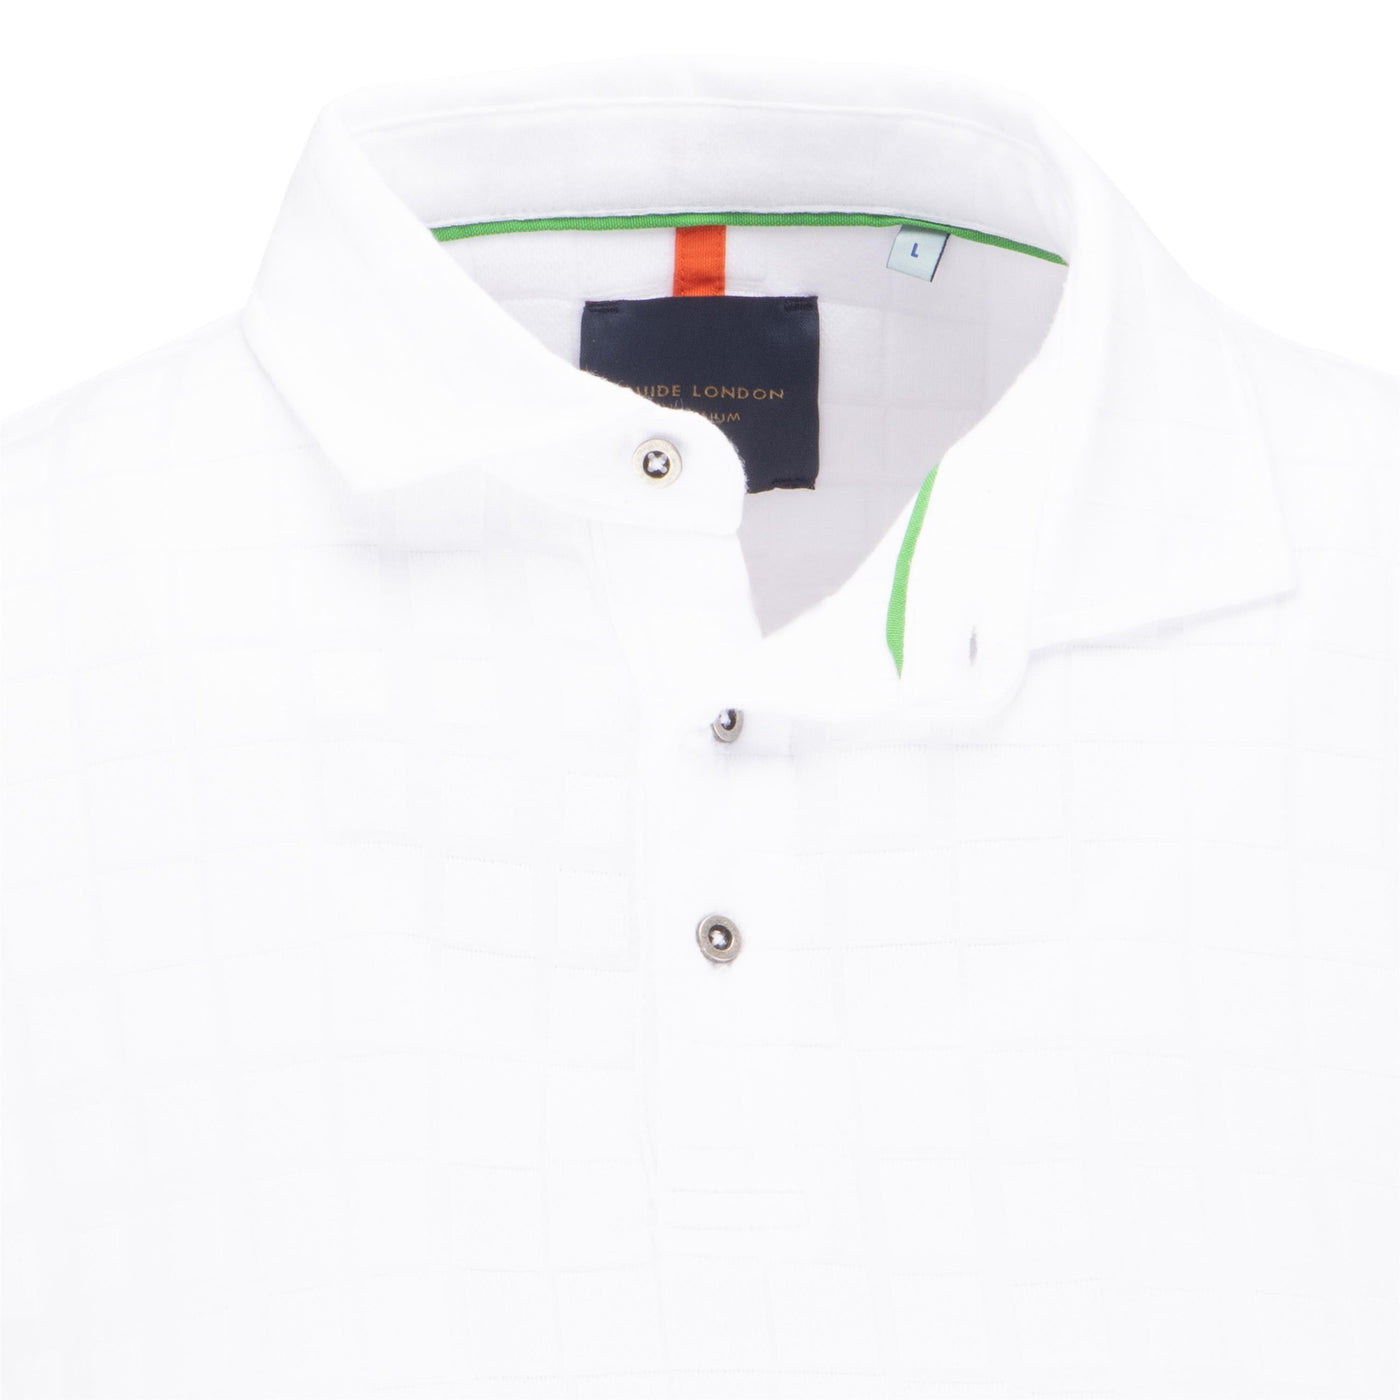 Square Textured Polo